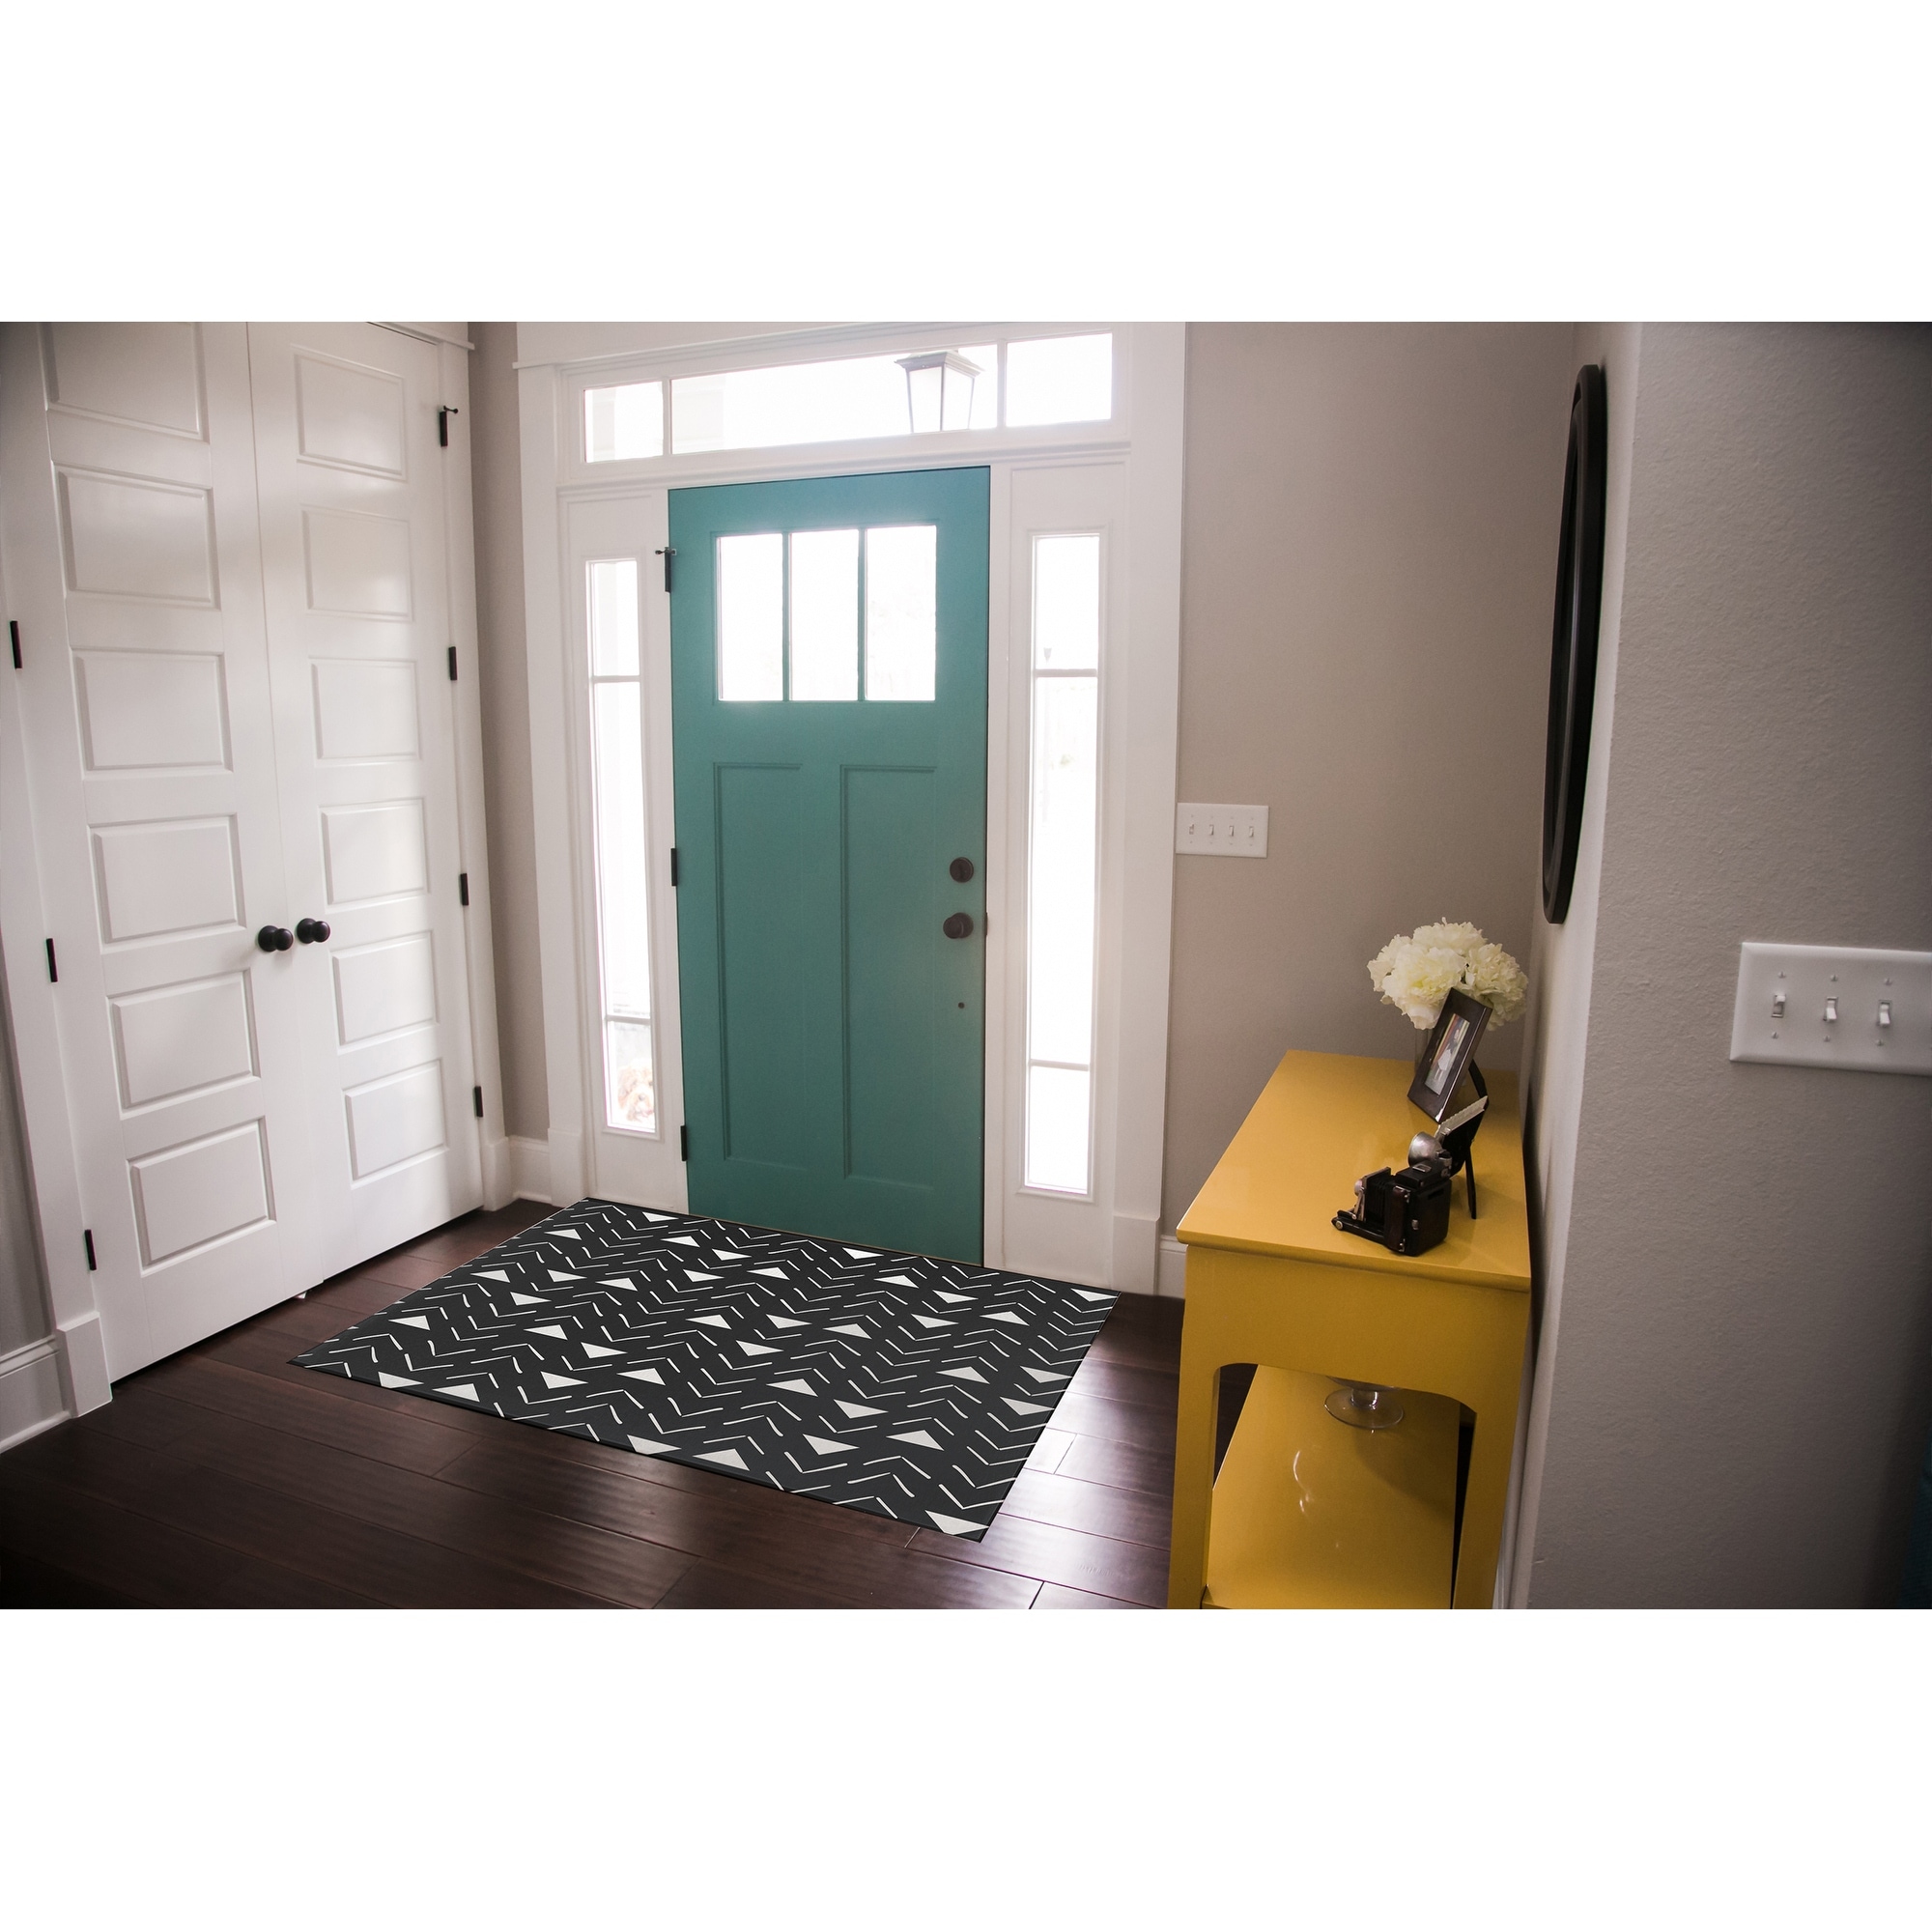 https://ak1.ostkcdn.com/images/products/is/images/direct/5648c319315a04bd0ee5da0958f85373f54ec7fd/MUD-CLOTH-BW-Indoor-Floor-Mat-By-Becky-Bailey.jpg